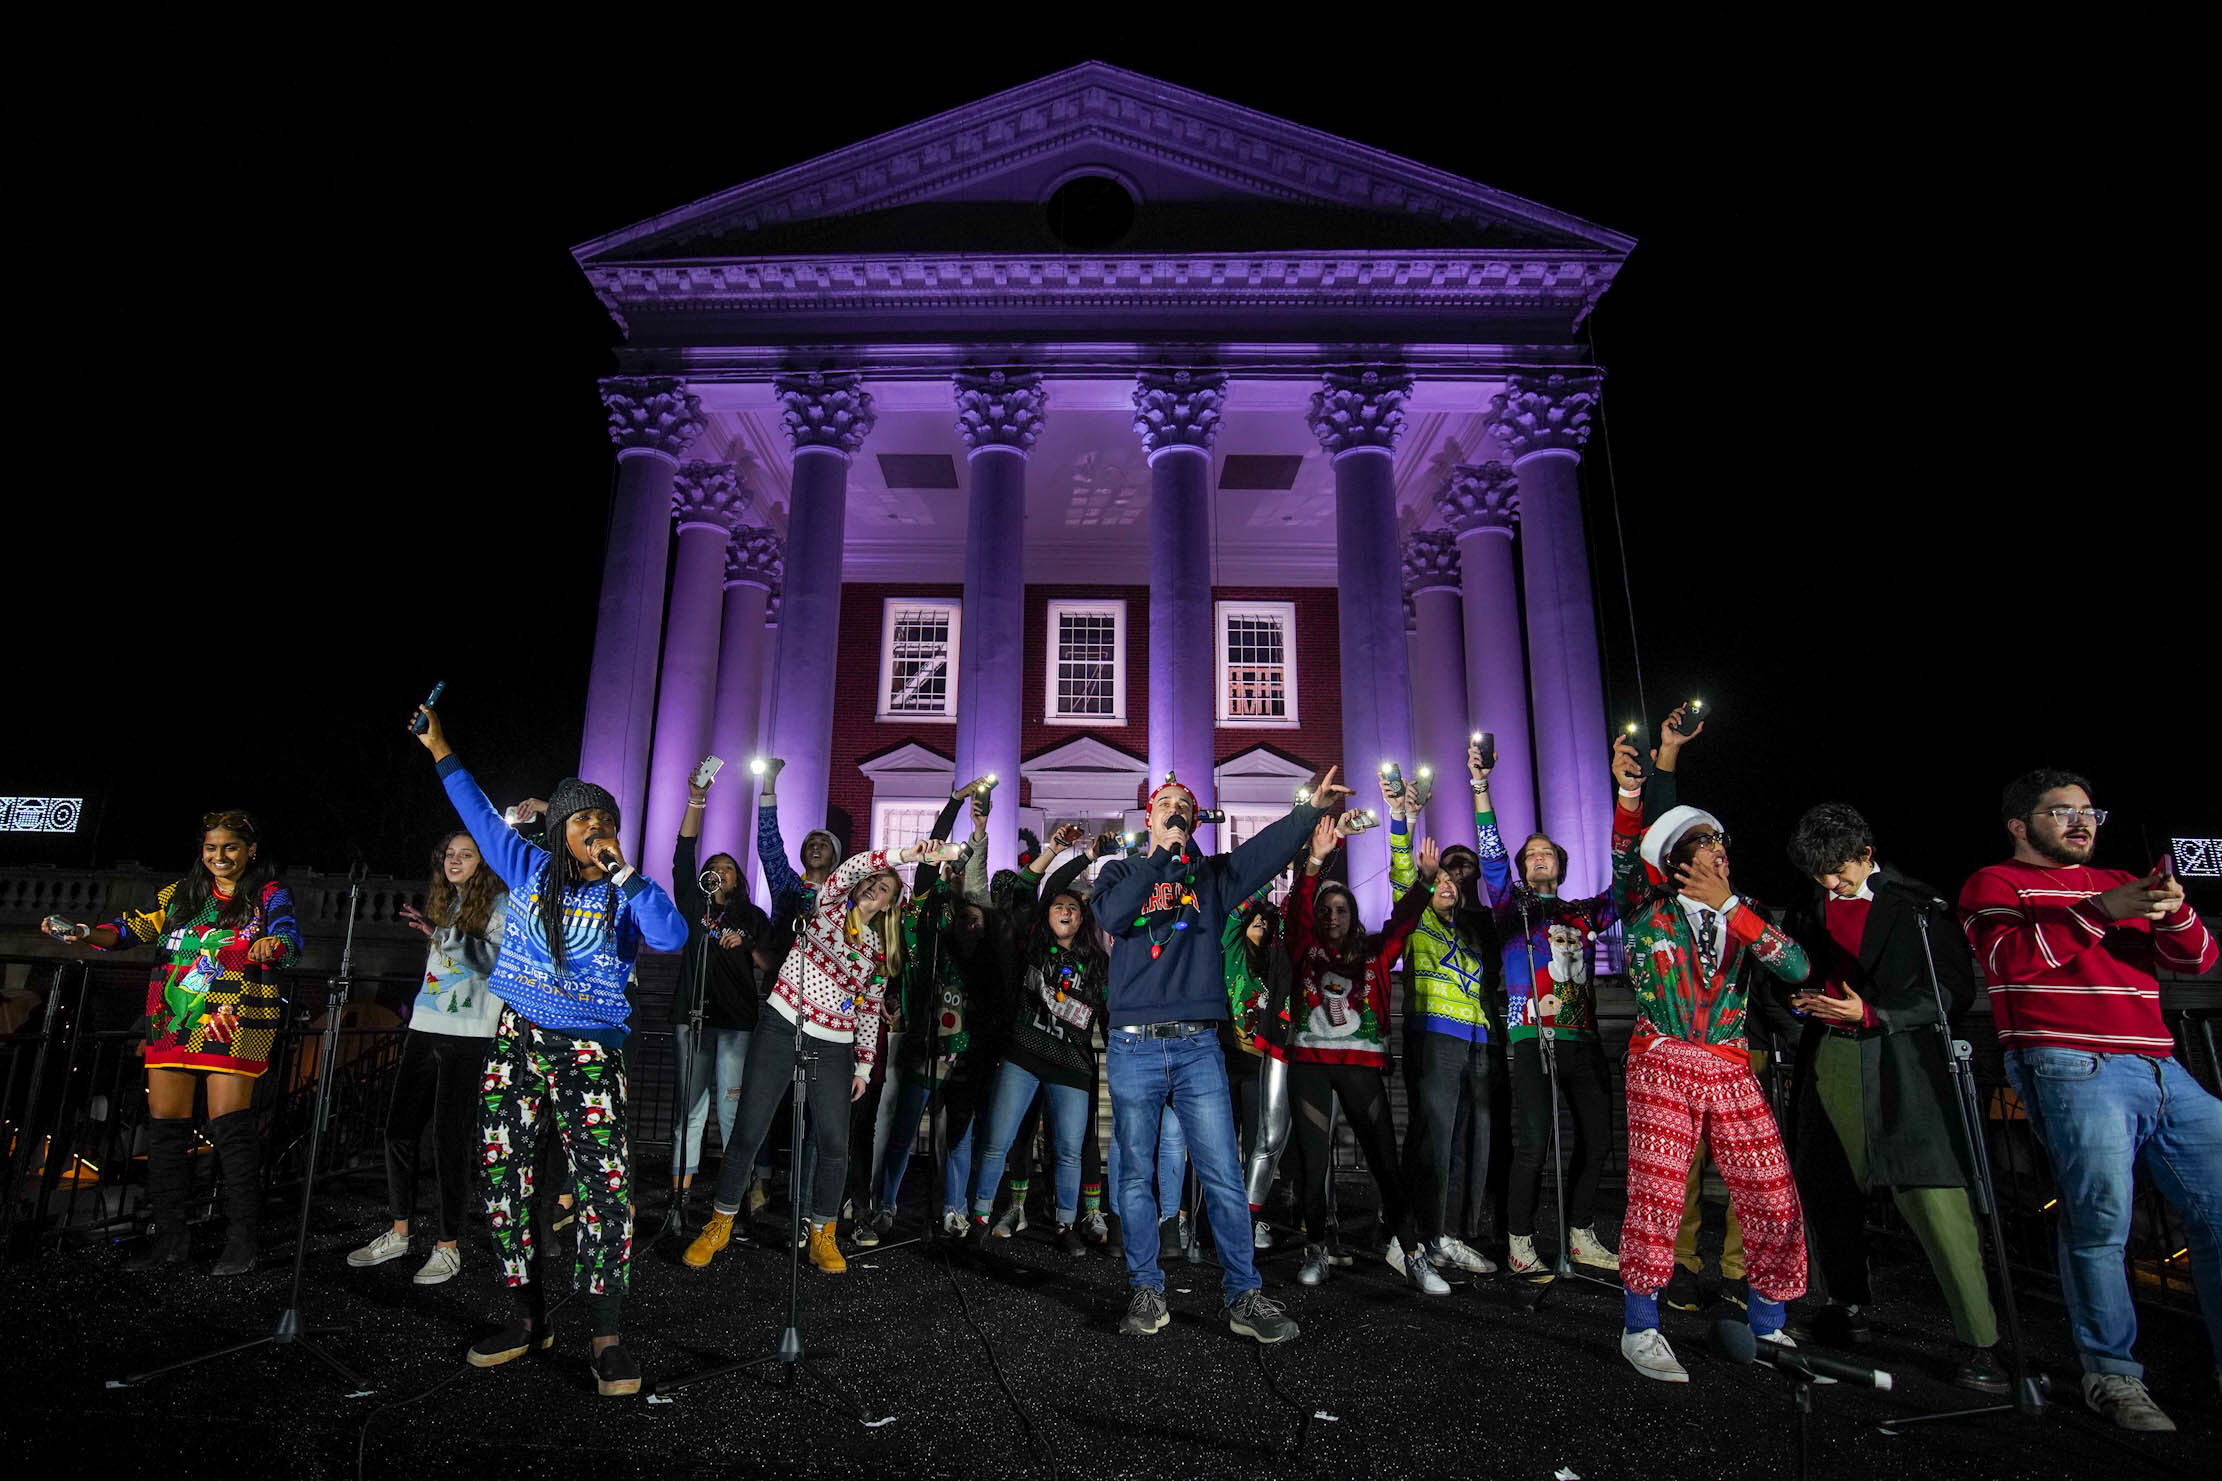 UVA's No tones singing group stands in front of the Rotunda illuminated in purple lights signing to a crowd